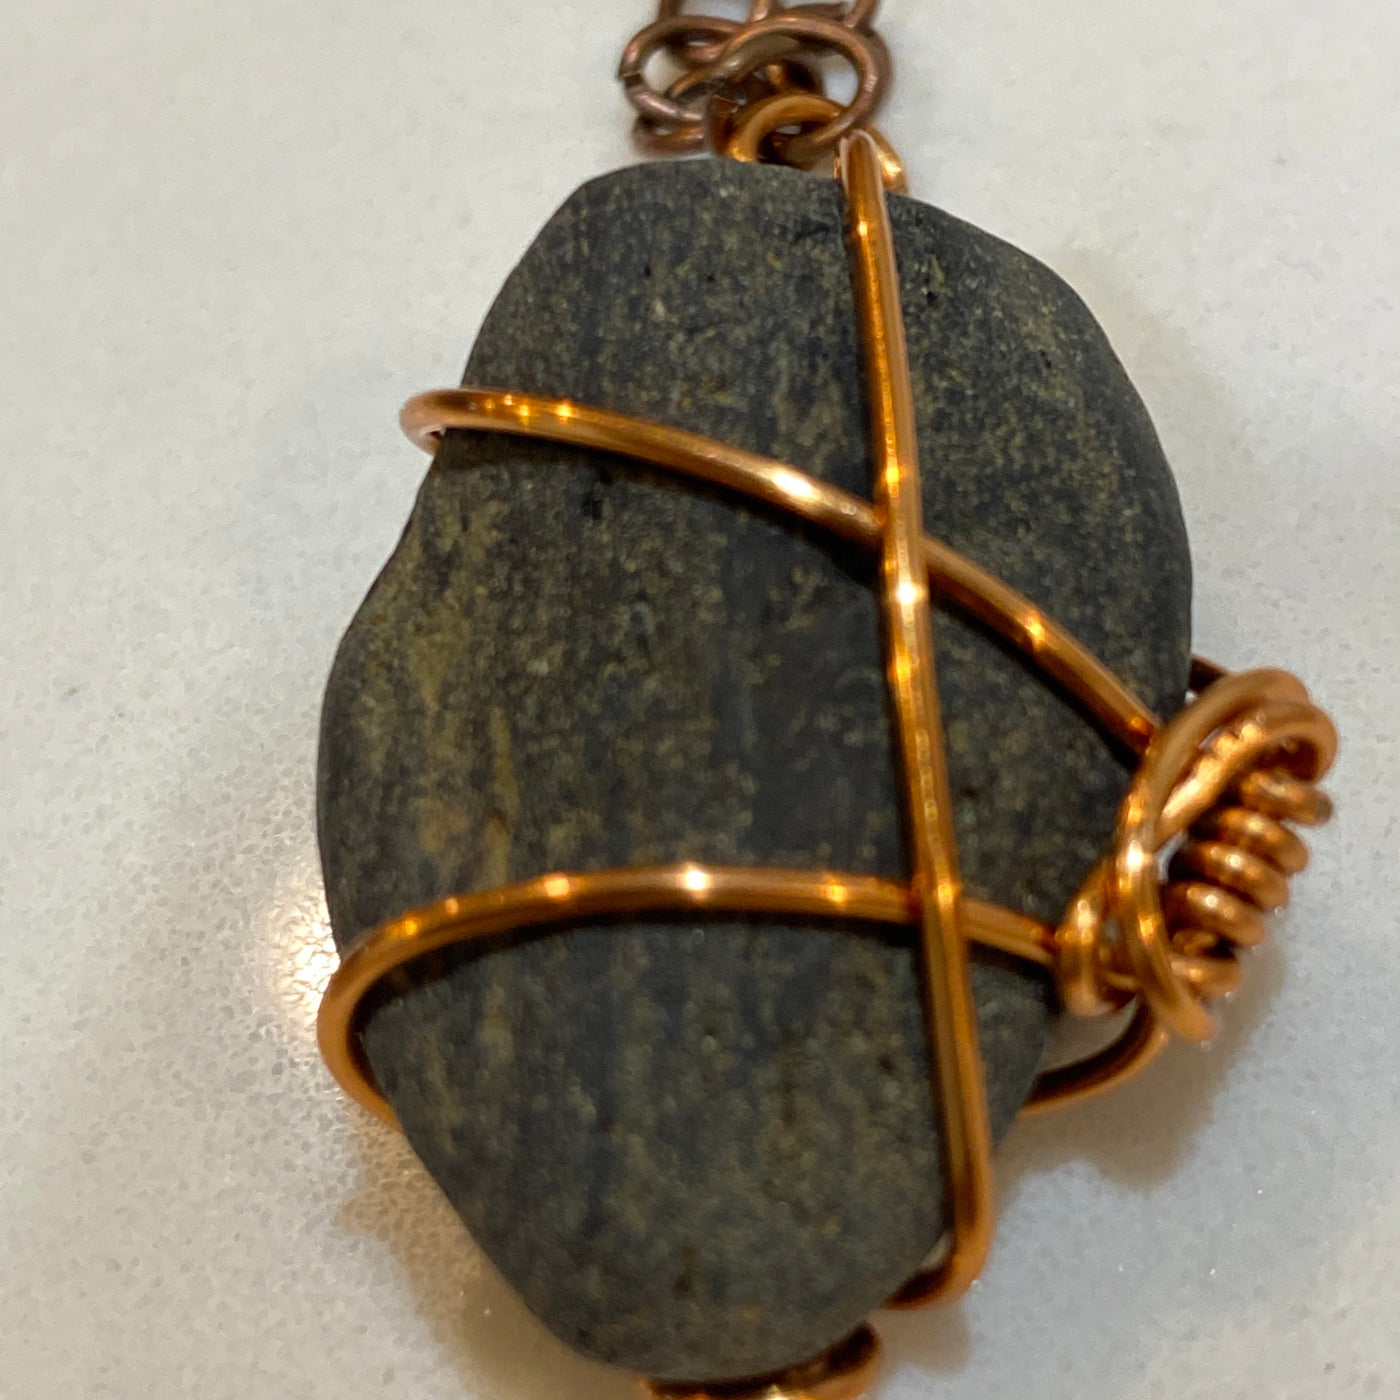 Grey natural stone on wires, small pendant for Elbastones.